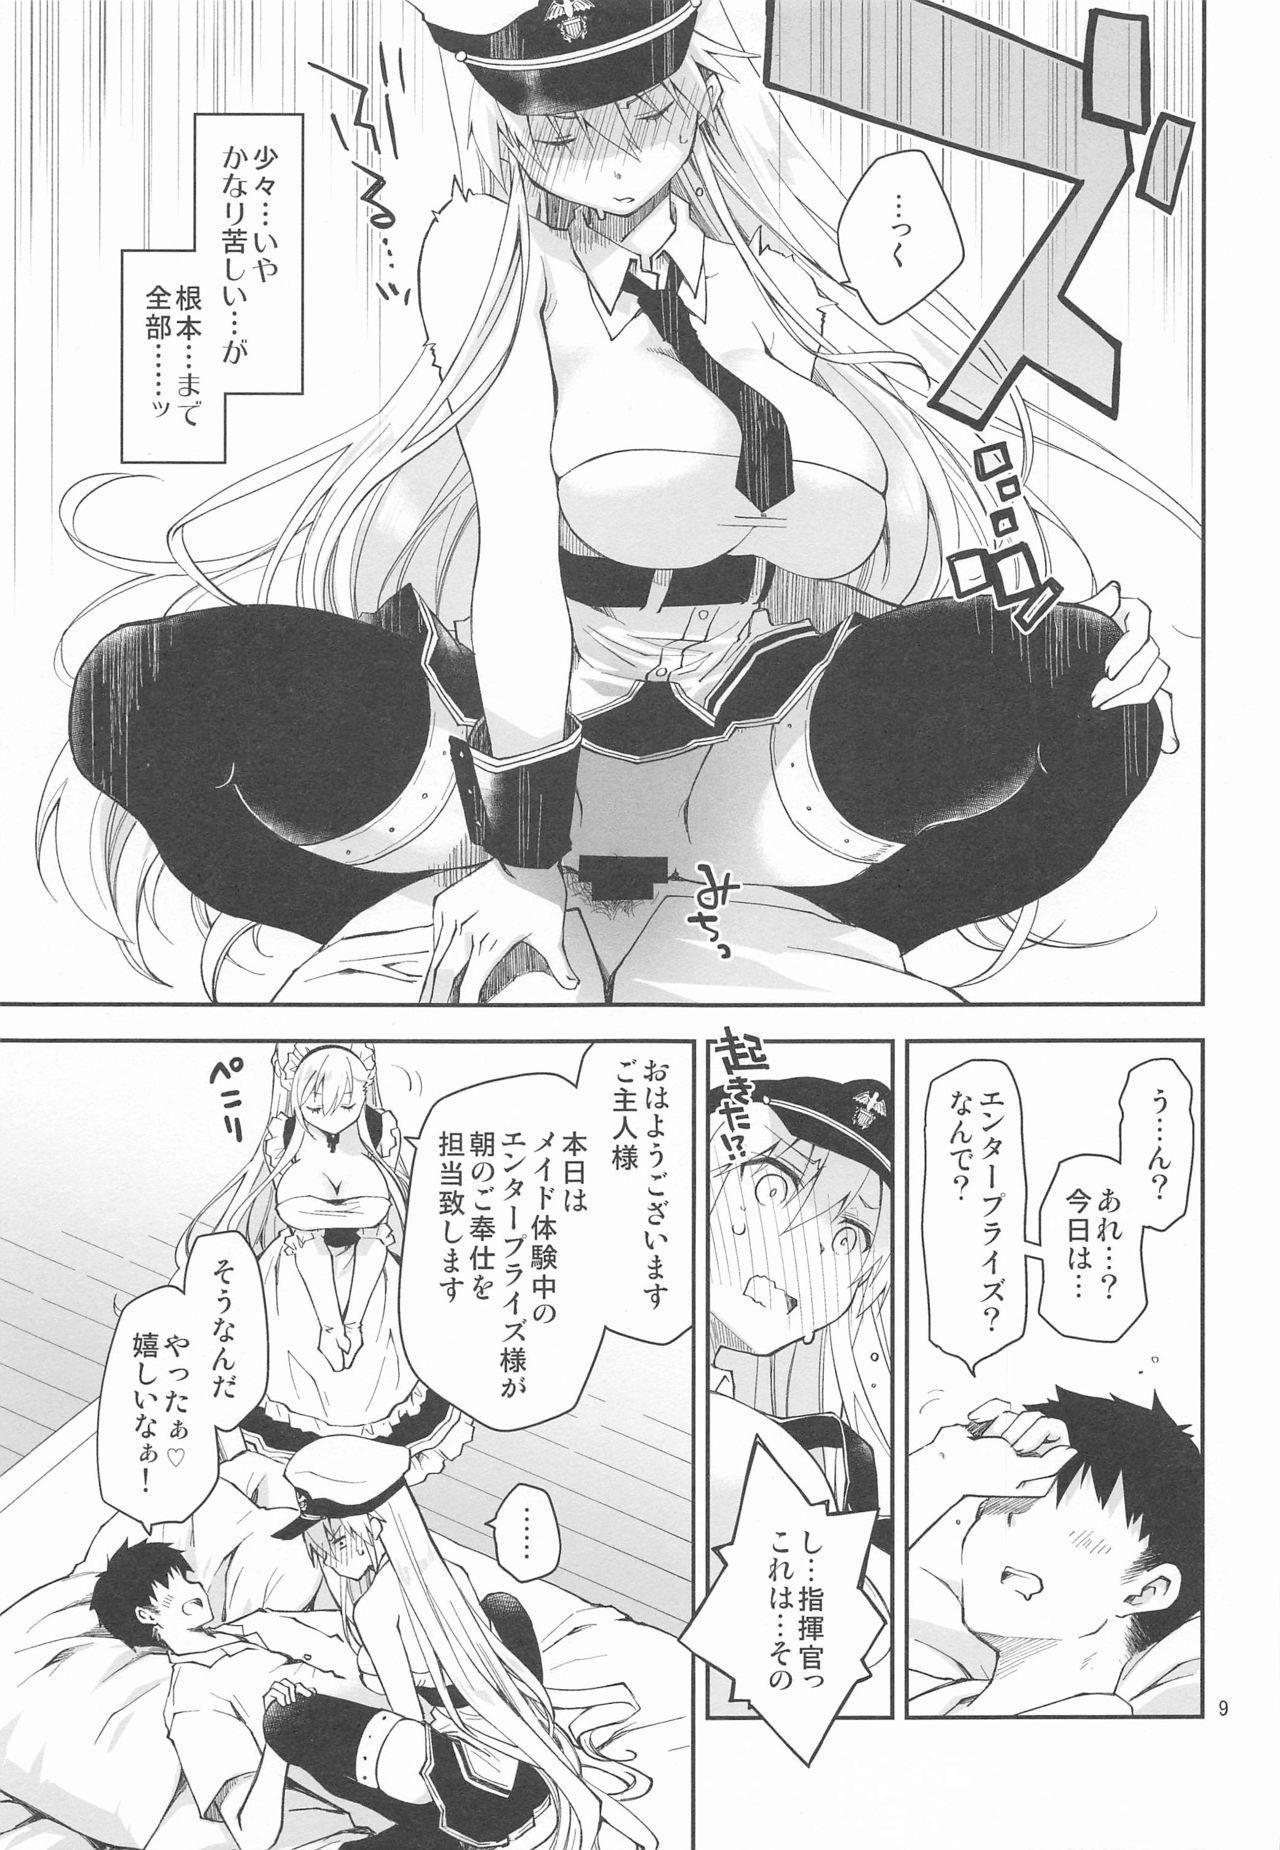 Culo Maid in Enterprise - Azur lane Caught - Page 8